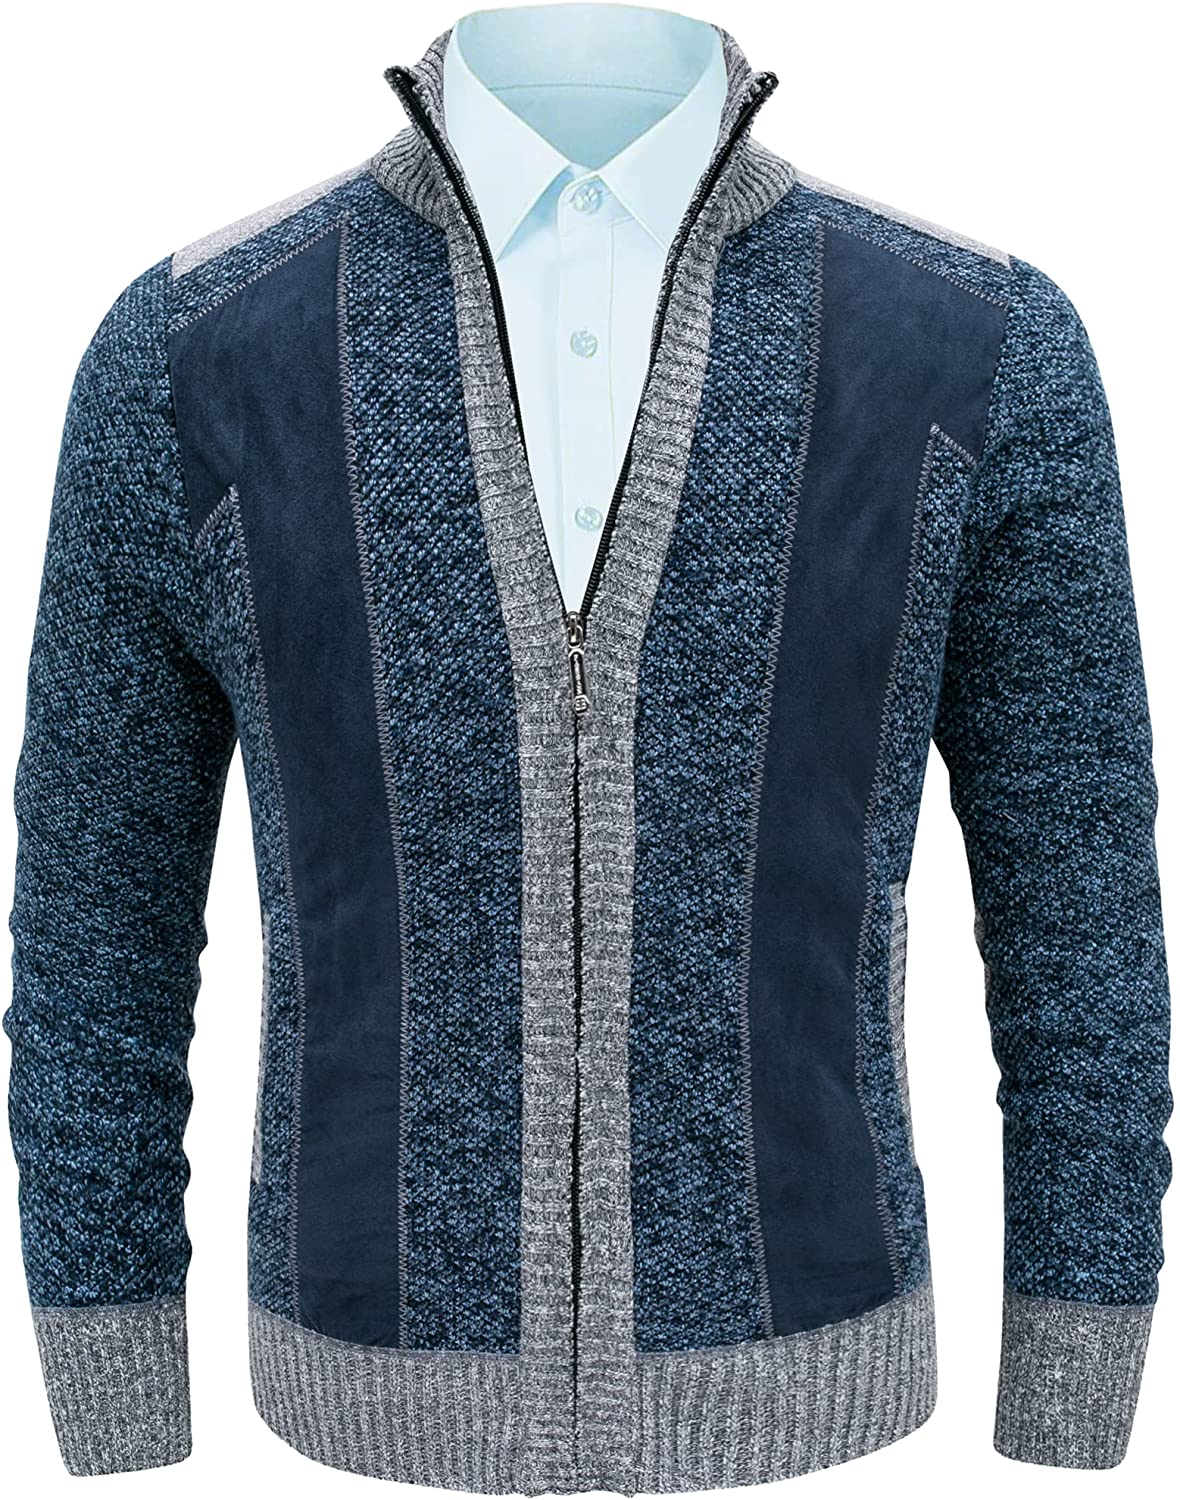 VtuAOL Men's Casual Slim Zip Up Thick Knitted Cardigan Sweaters with Pockets 